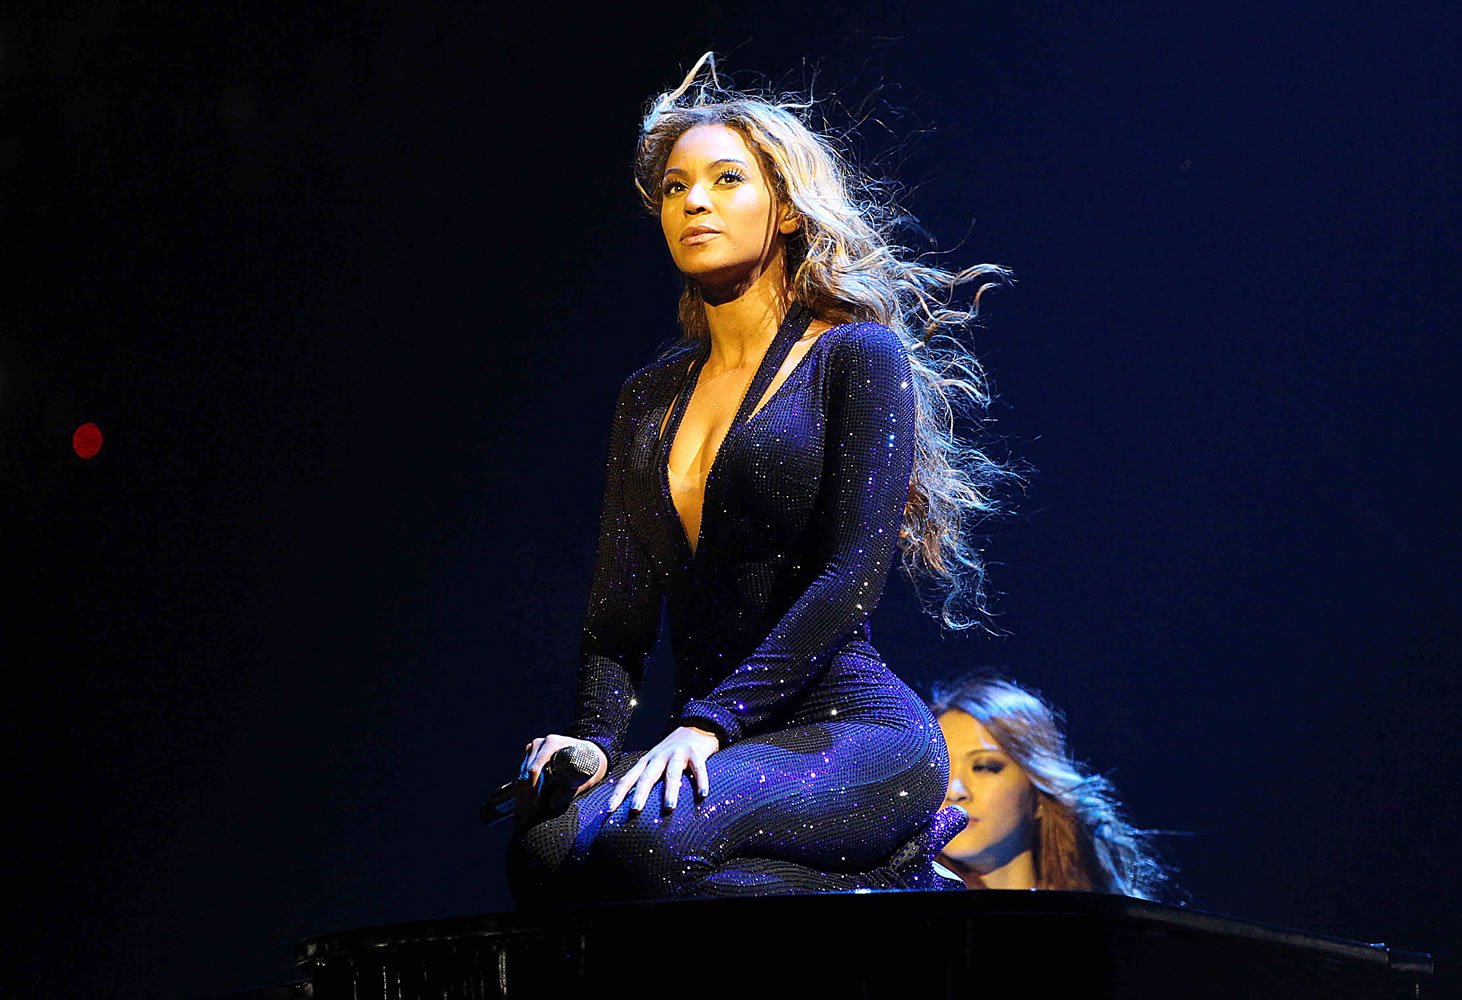 Beyonce performs on the opening night of her &quot;Mrs. Carter Show World Tour 2013&quot; in Belgrade, Serbia. The tour wraps up on Aug.